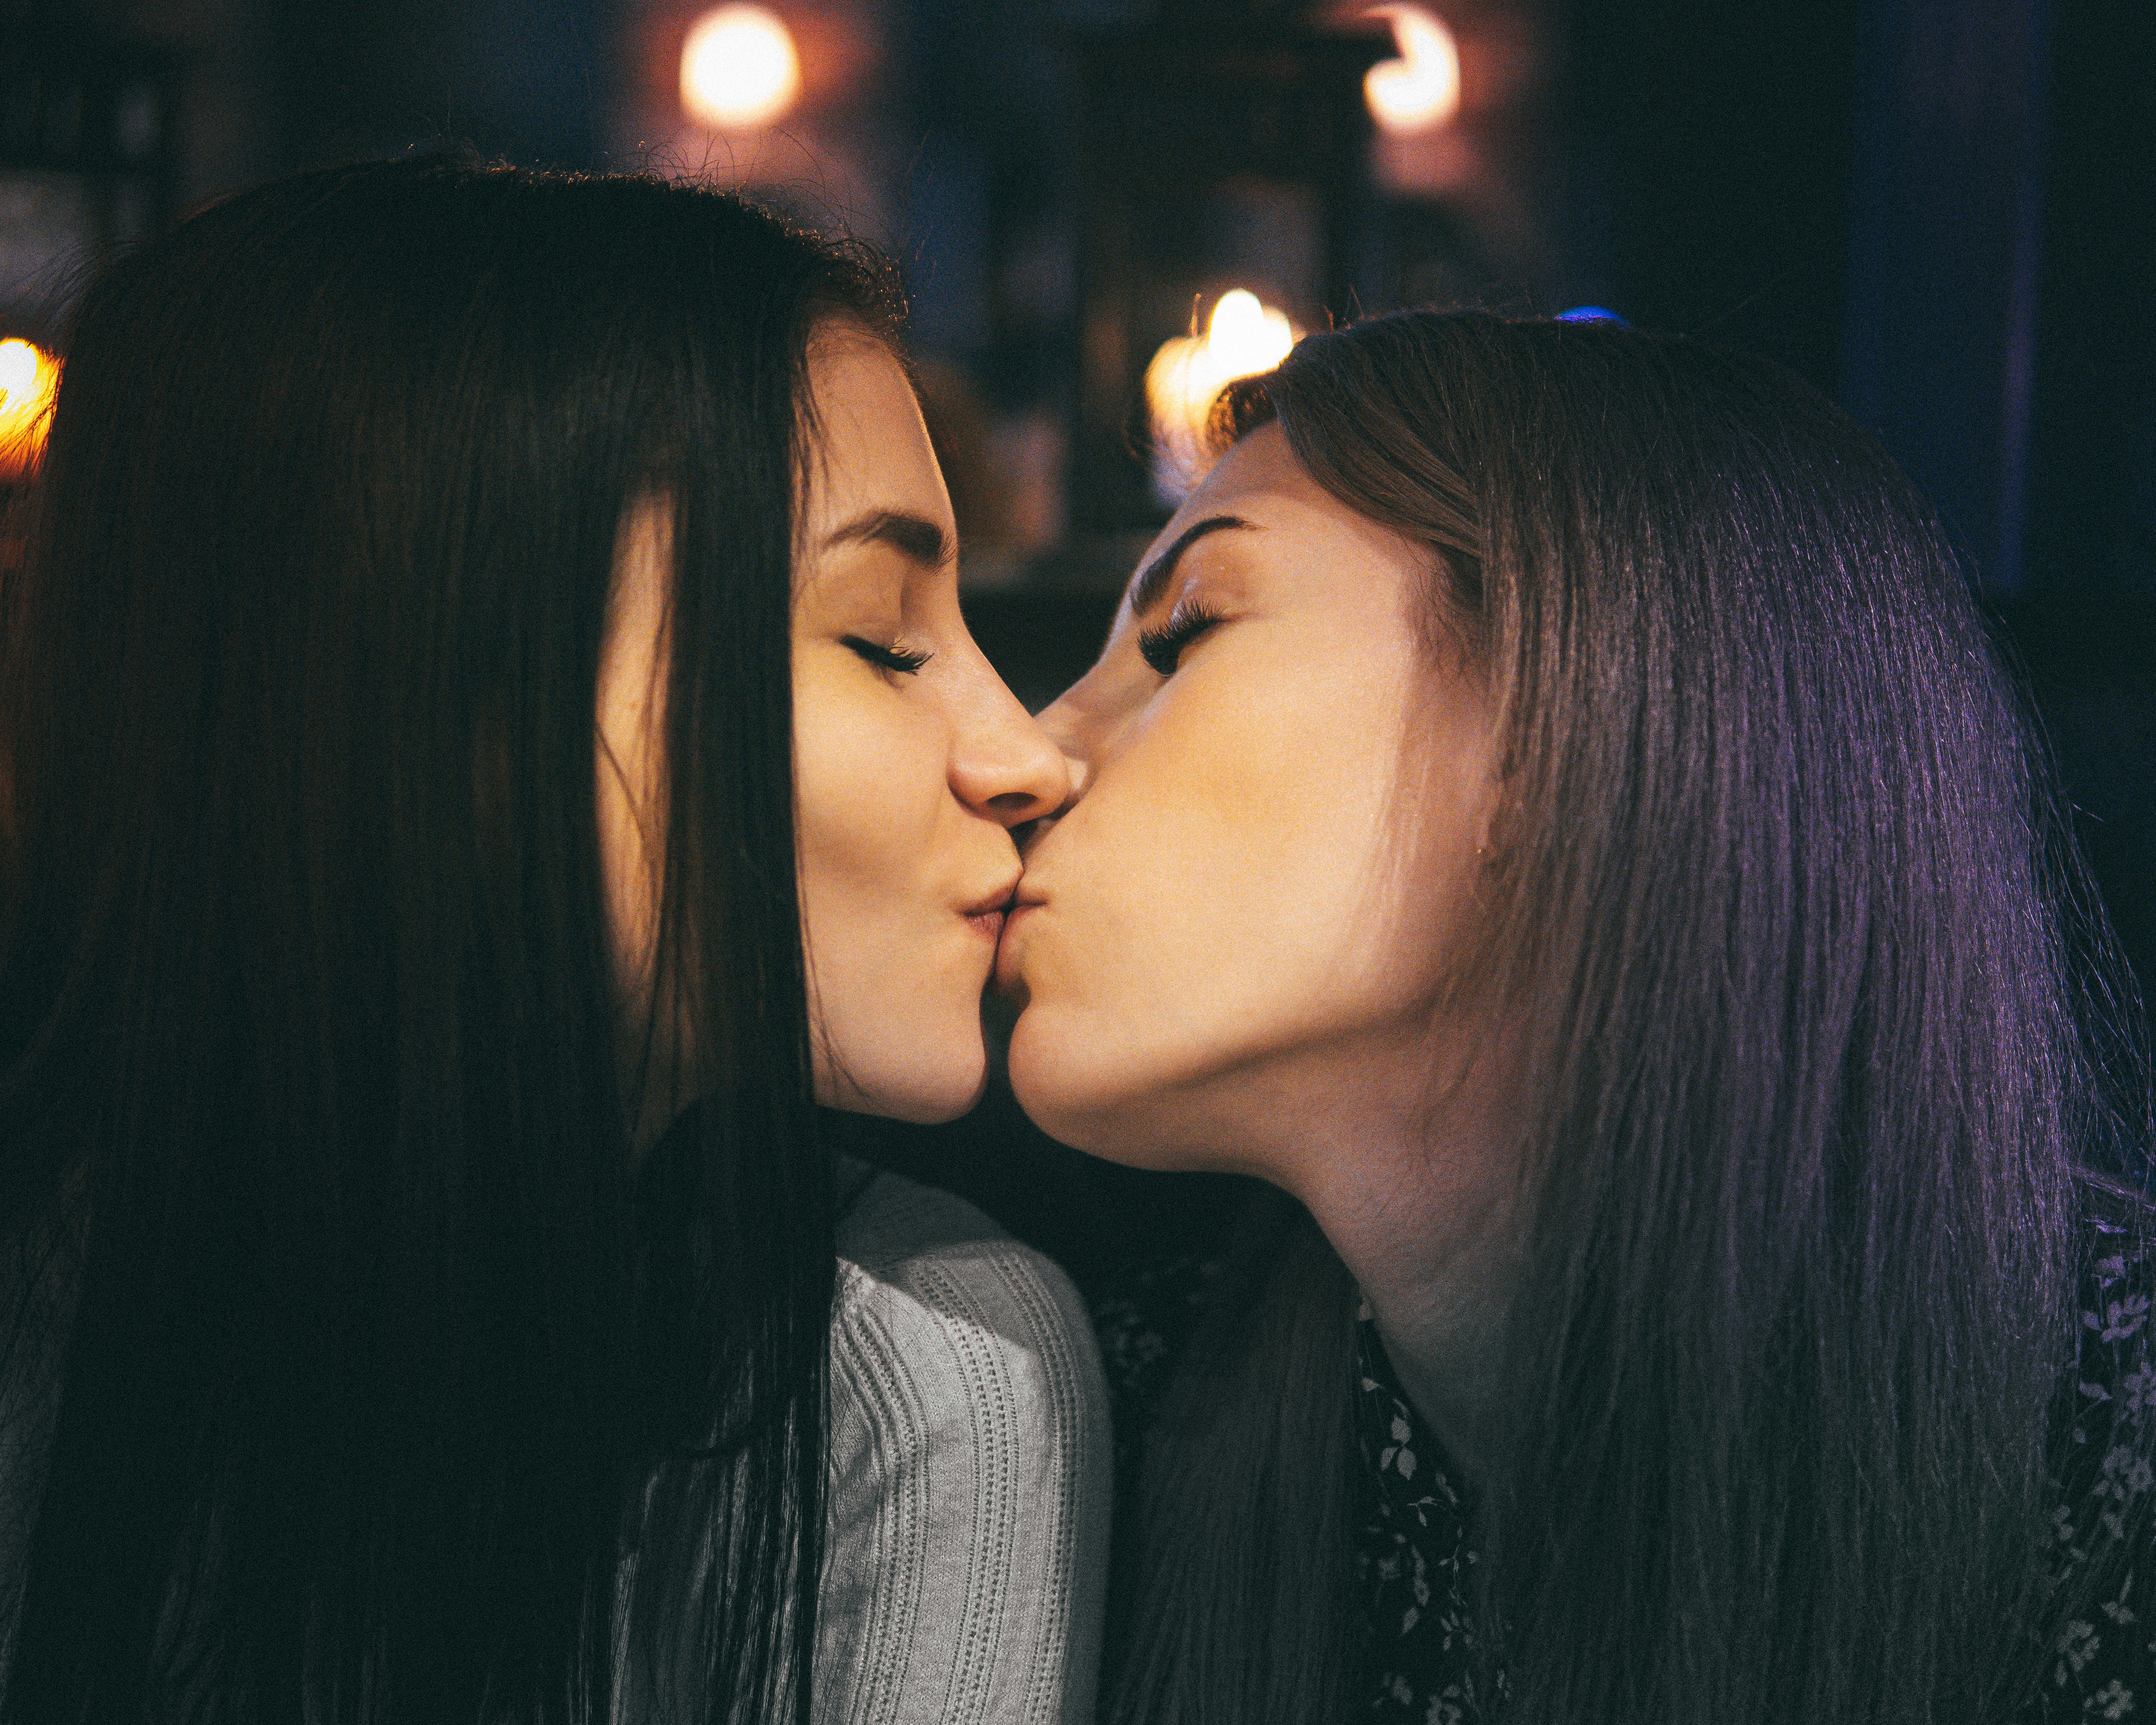 Choose from a curated selection of kiss photos. Always free on Unsplash.